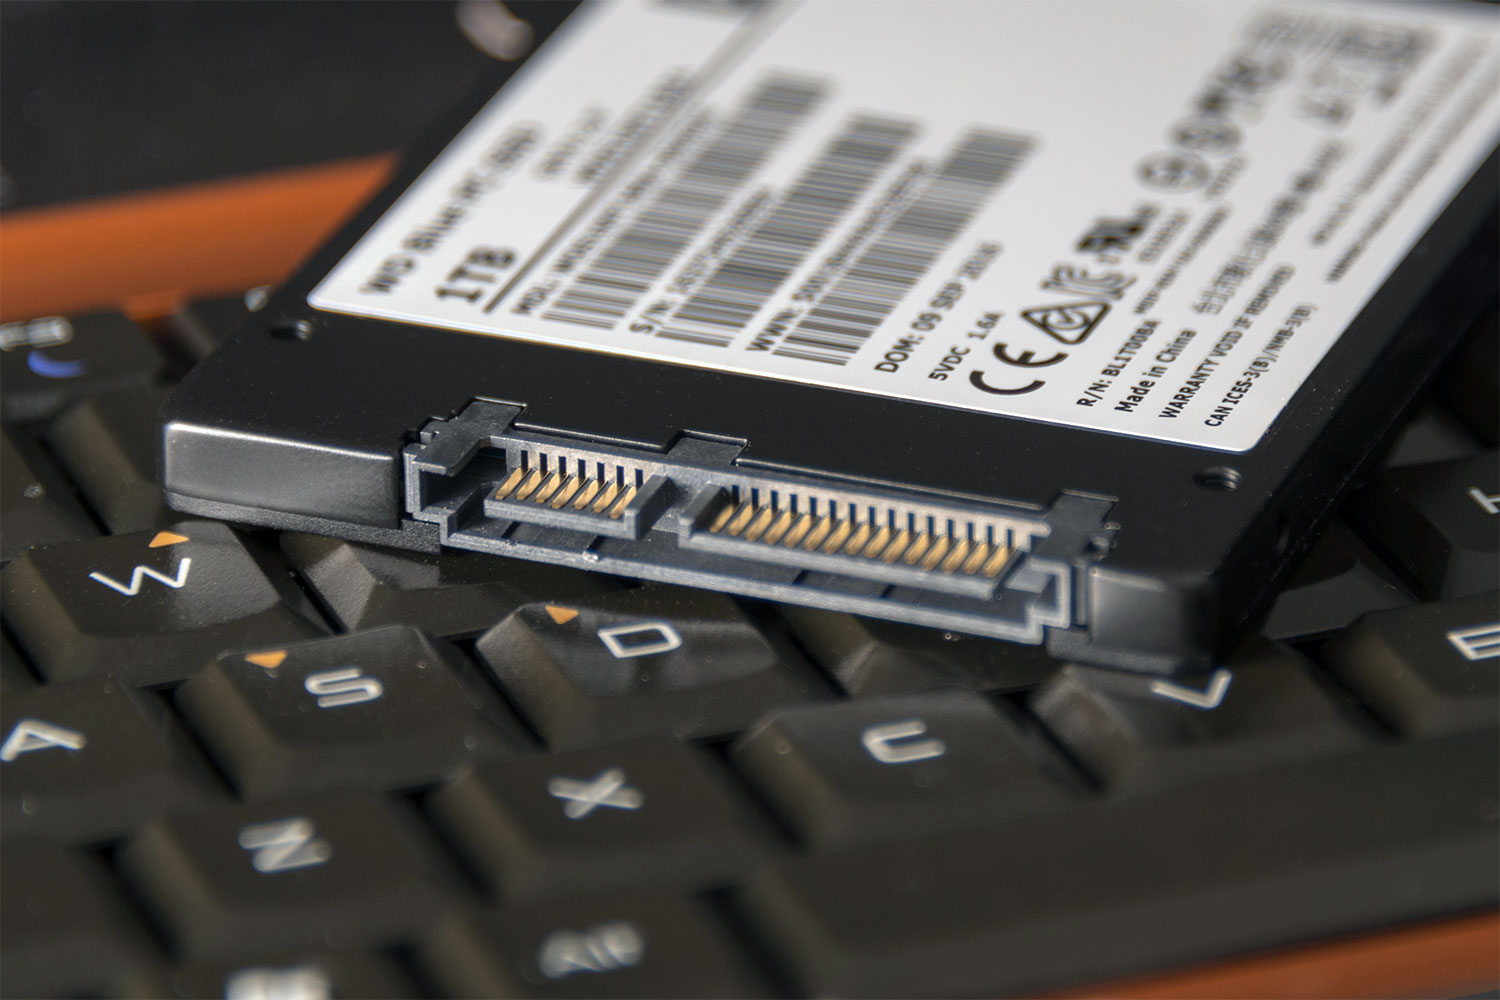 Your Laptop By Installing an SSD Yourself | Trends